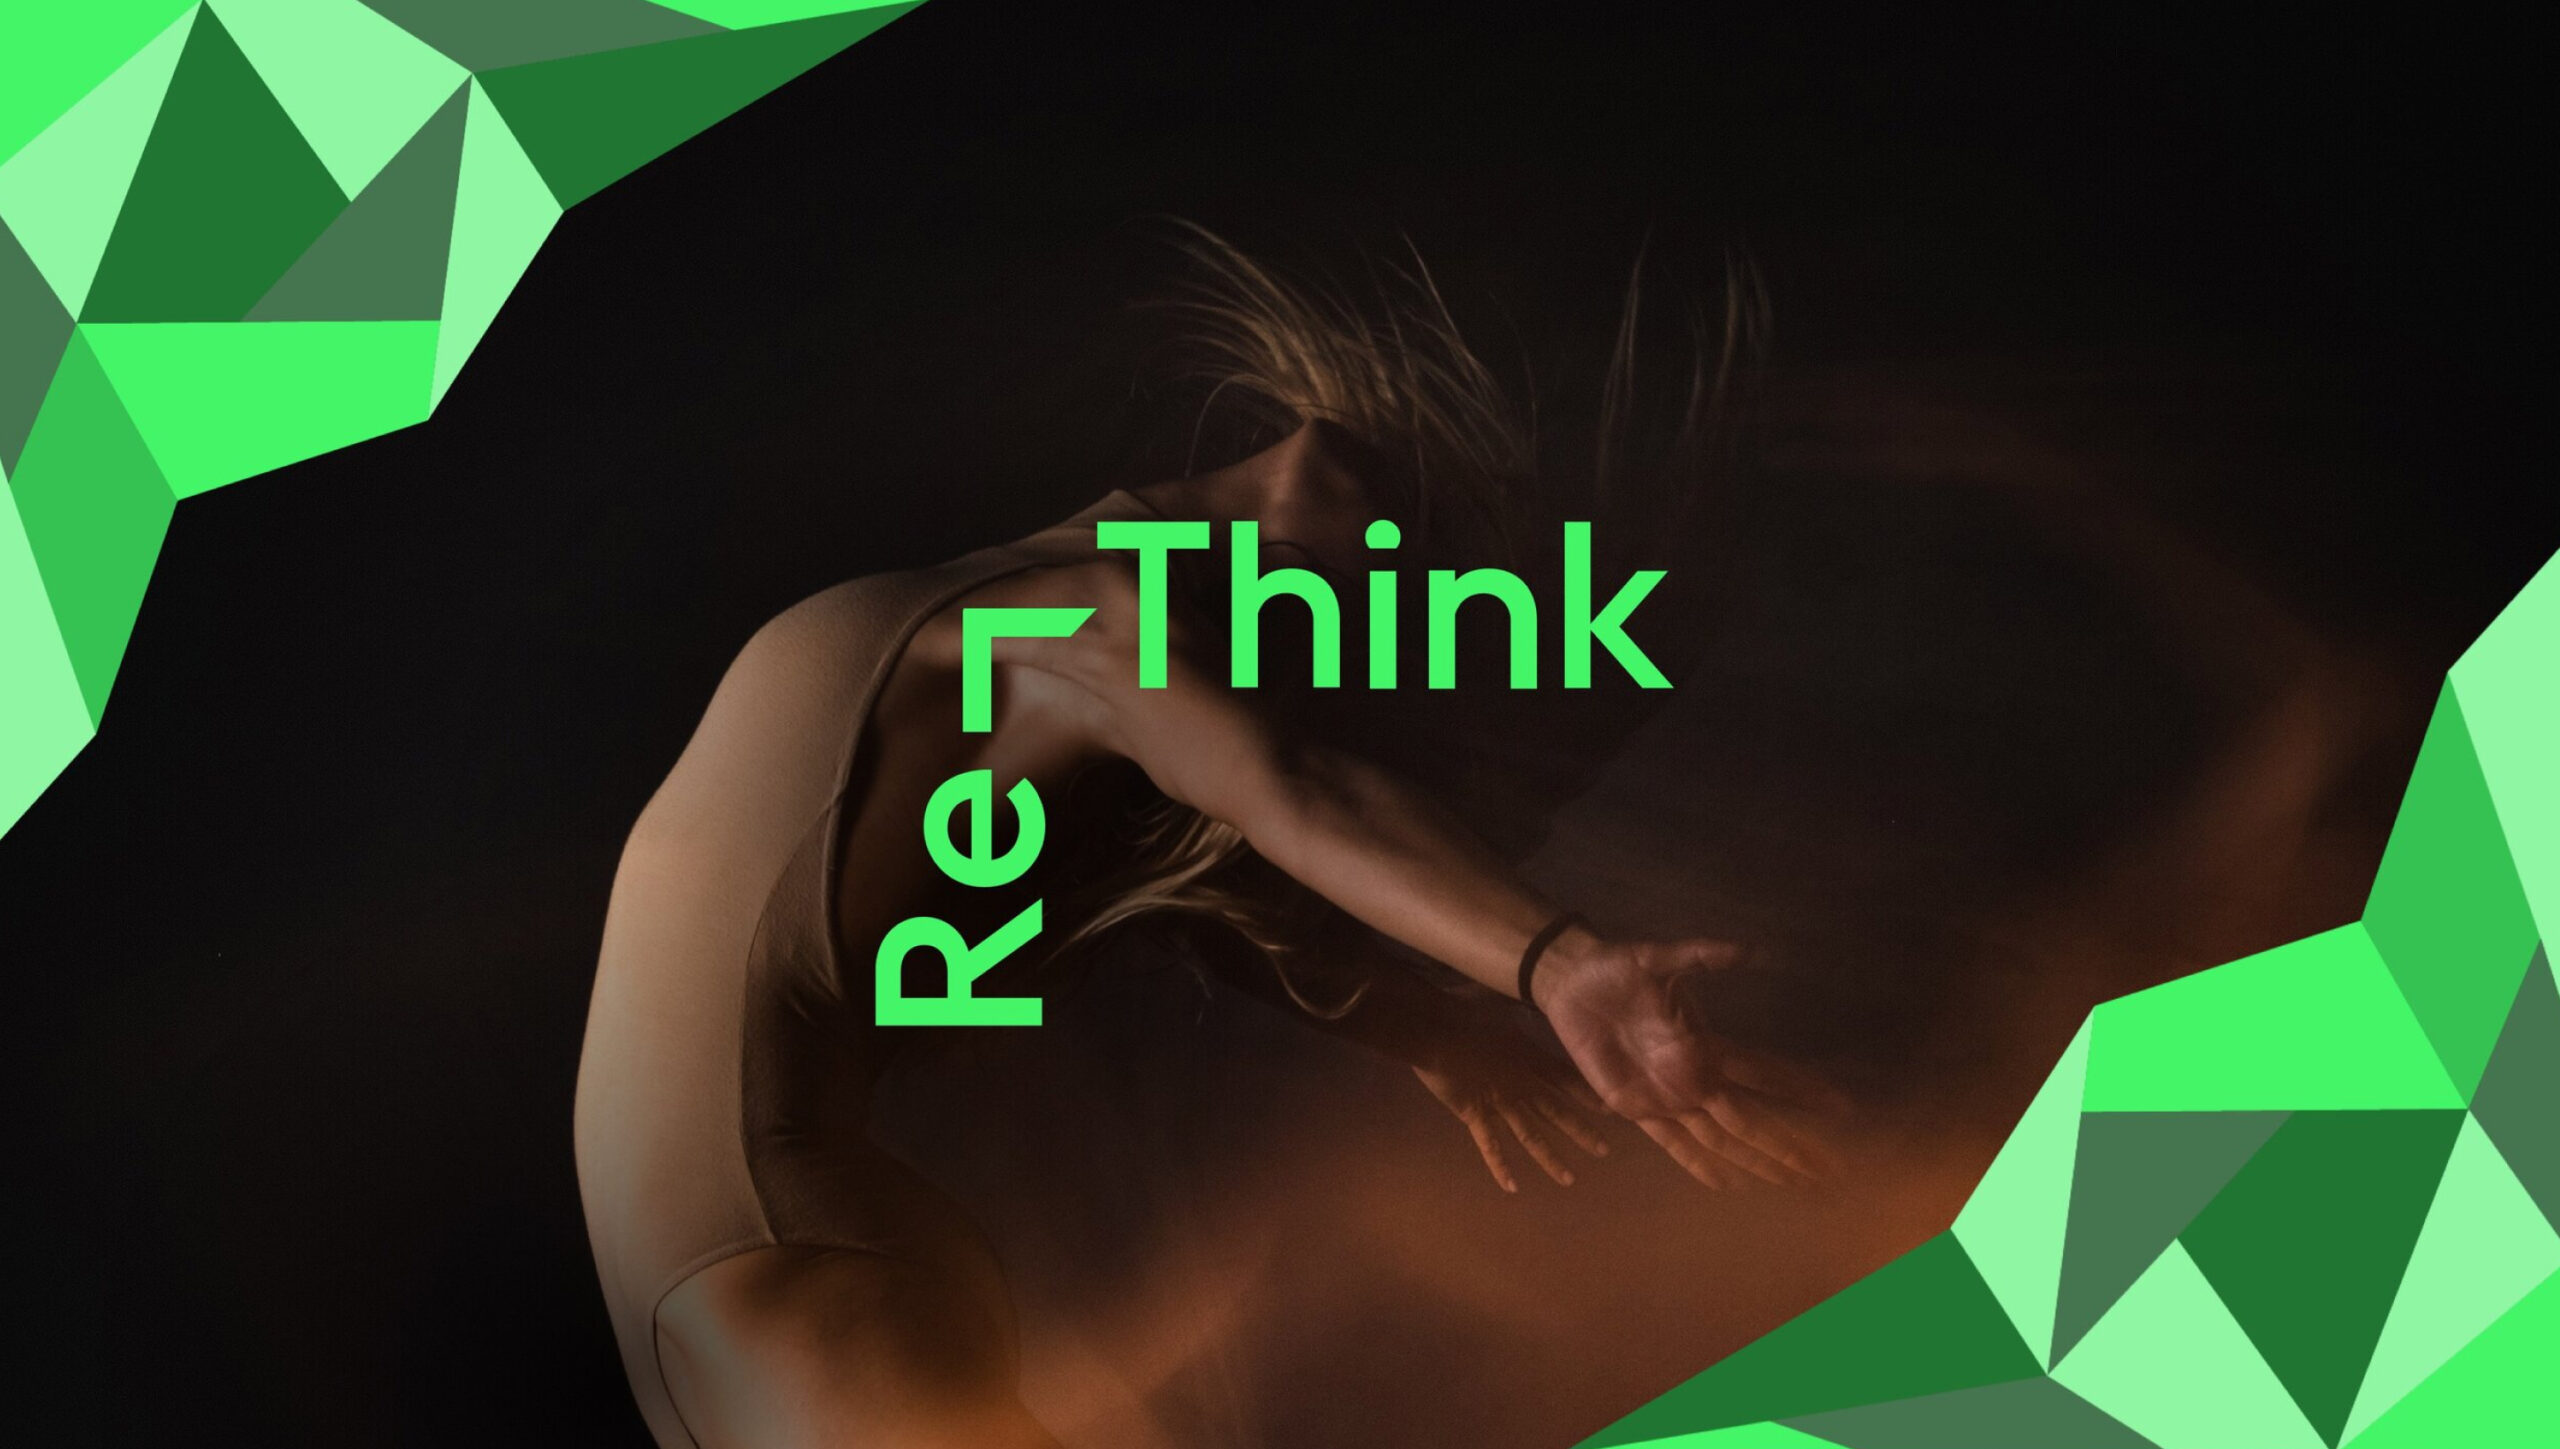 02.Re-think